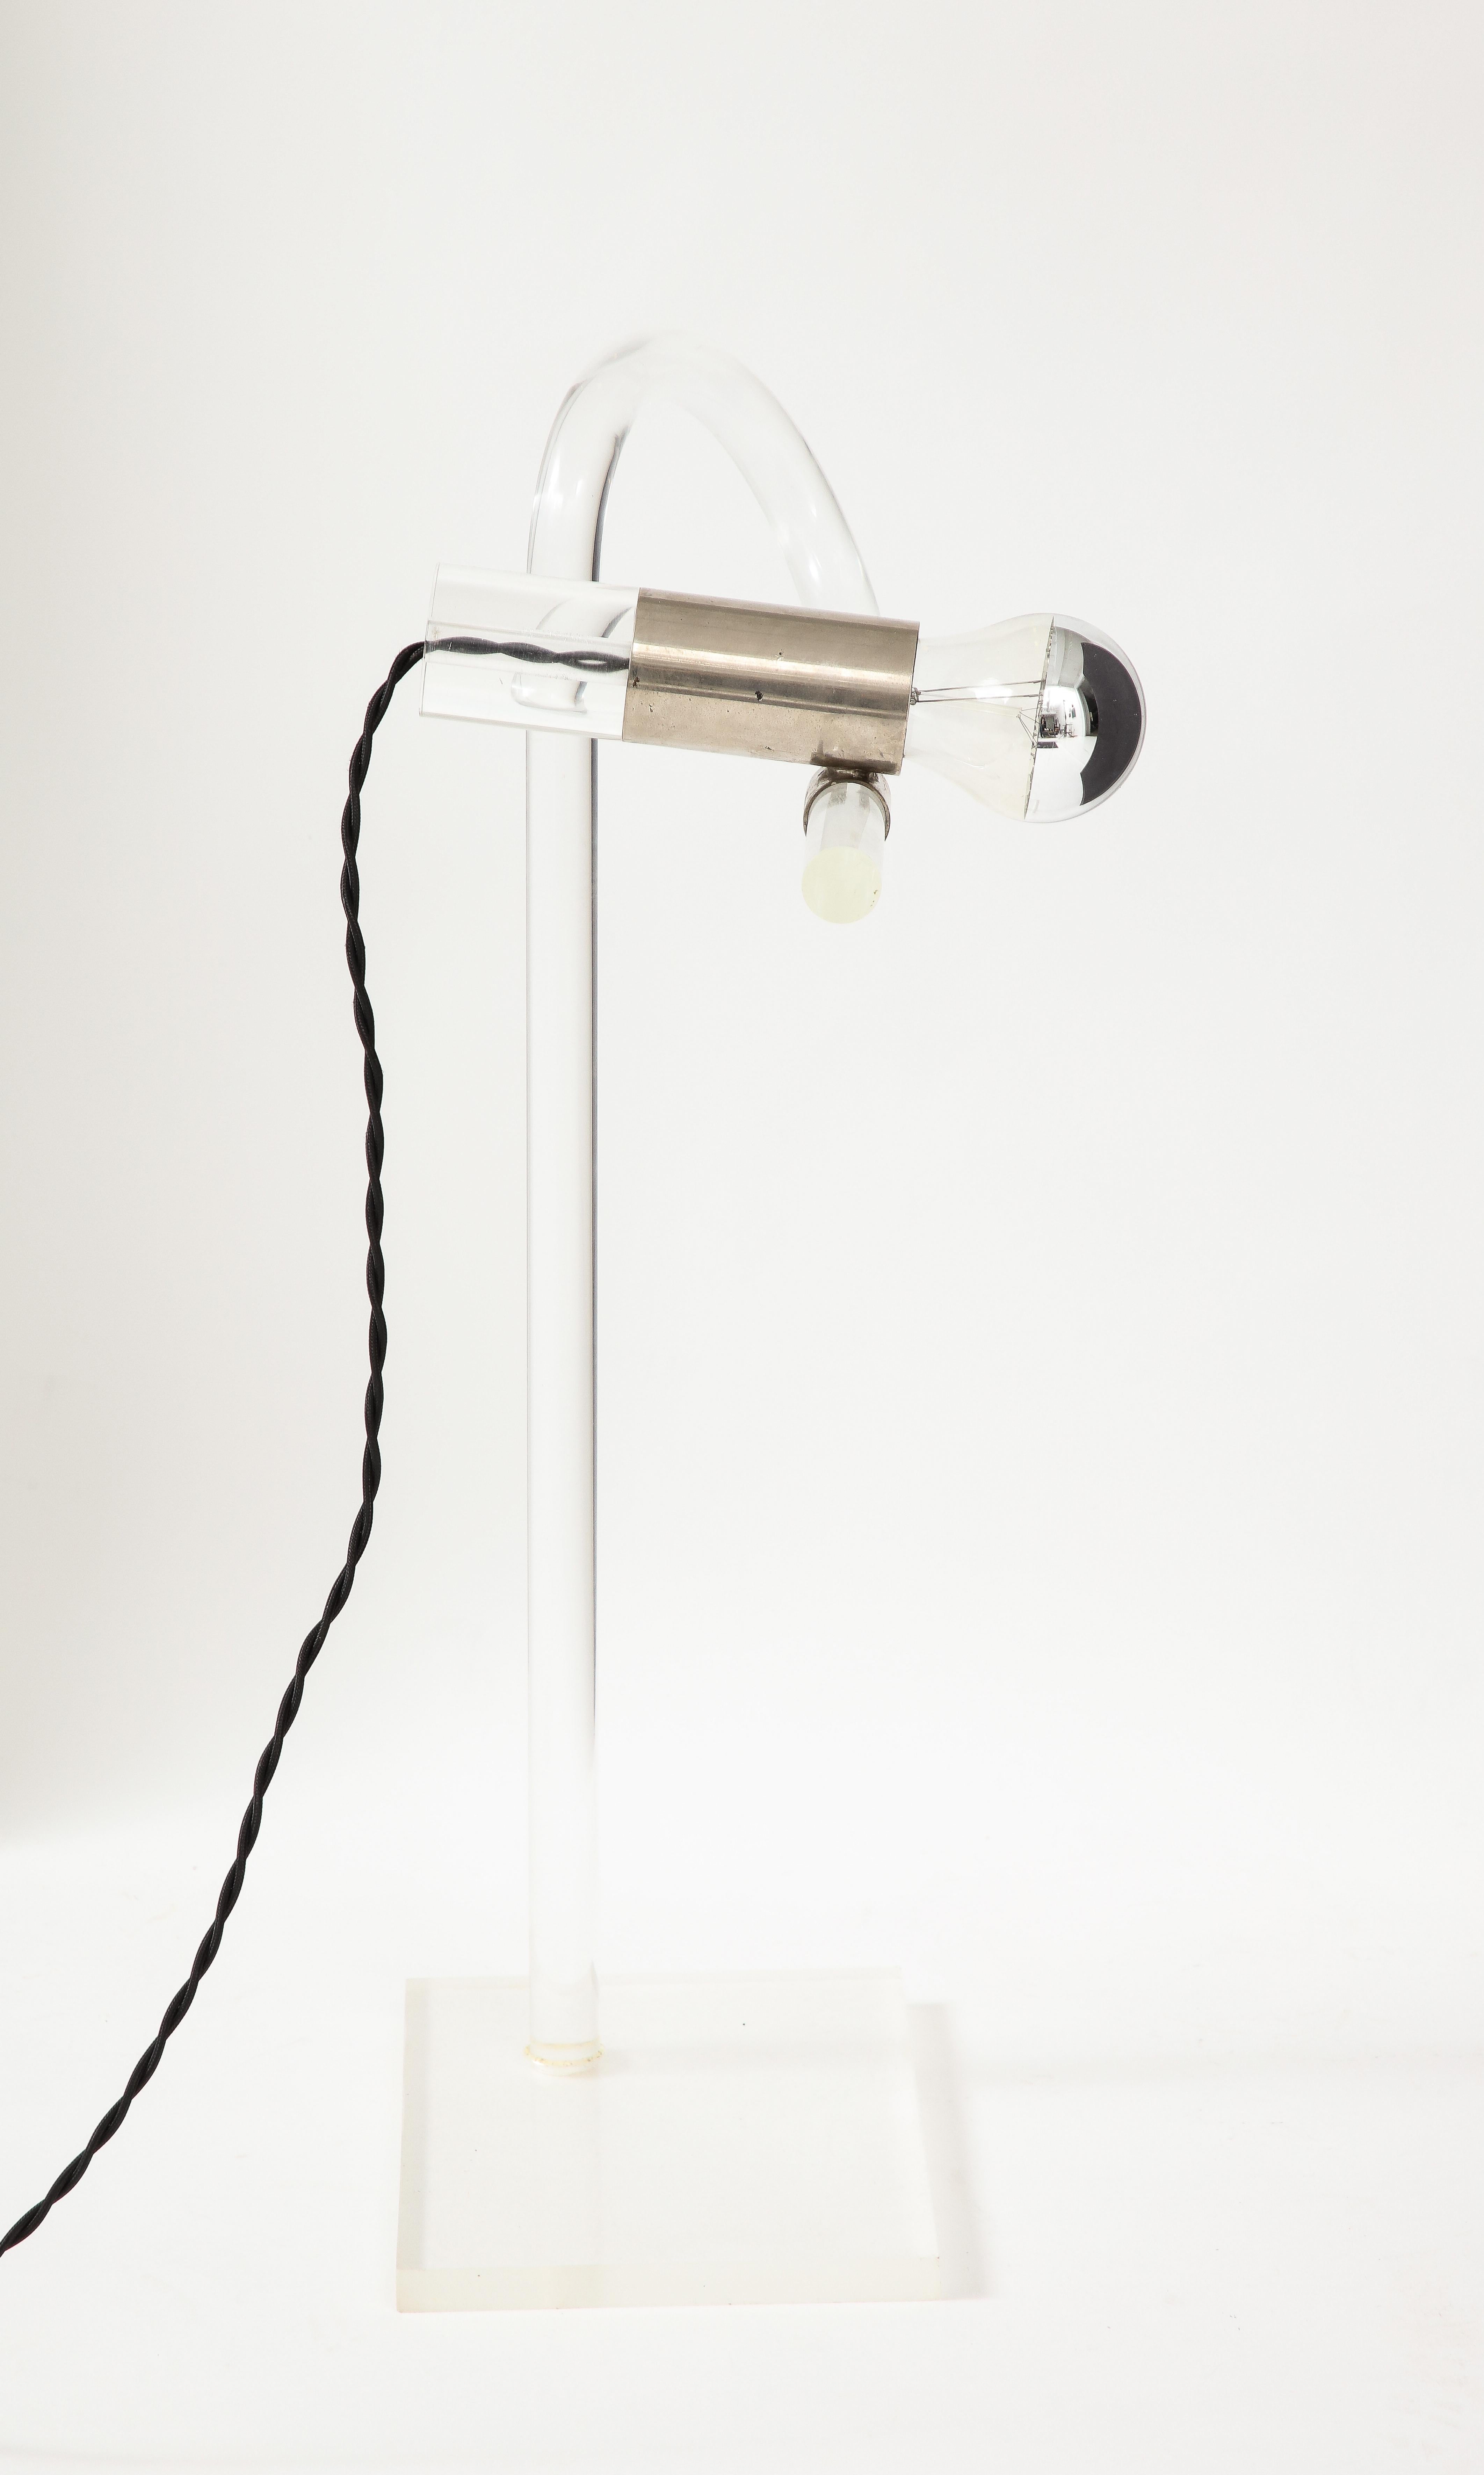 Late 20th Century Lucite and Chrome Table Lamp by Peter Hamburger for Knoll - USA 1970s For Sale